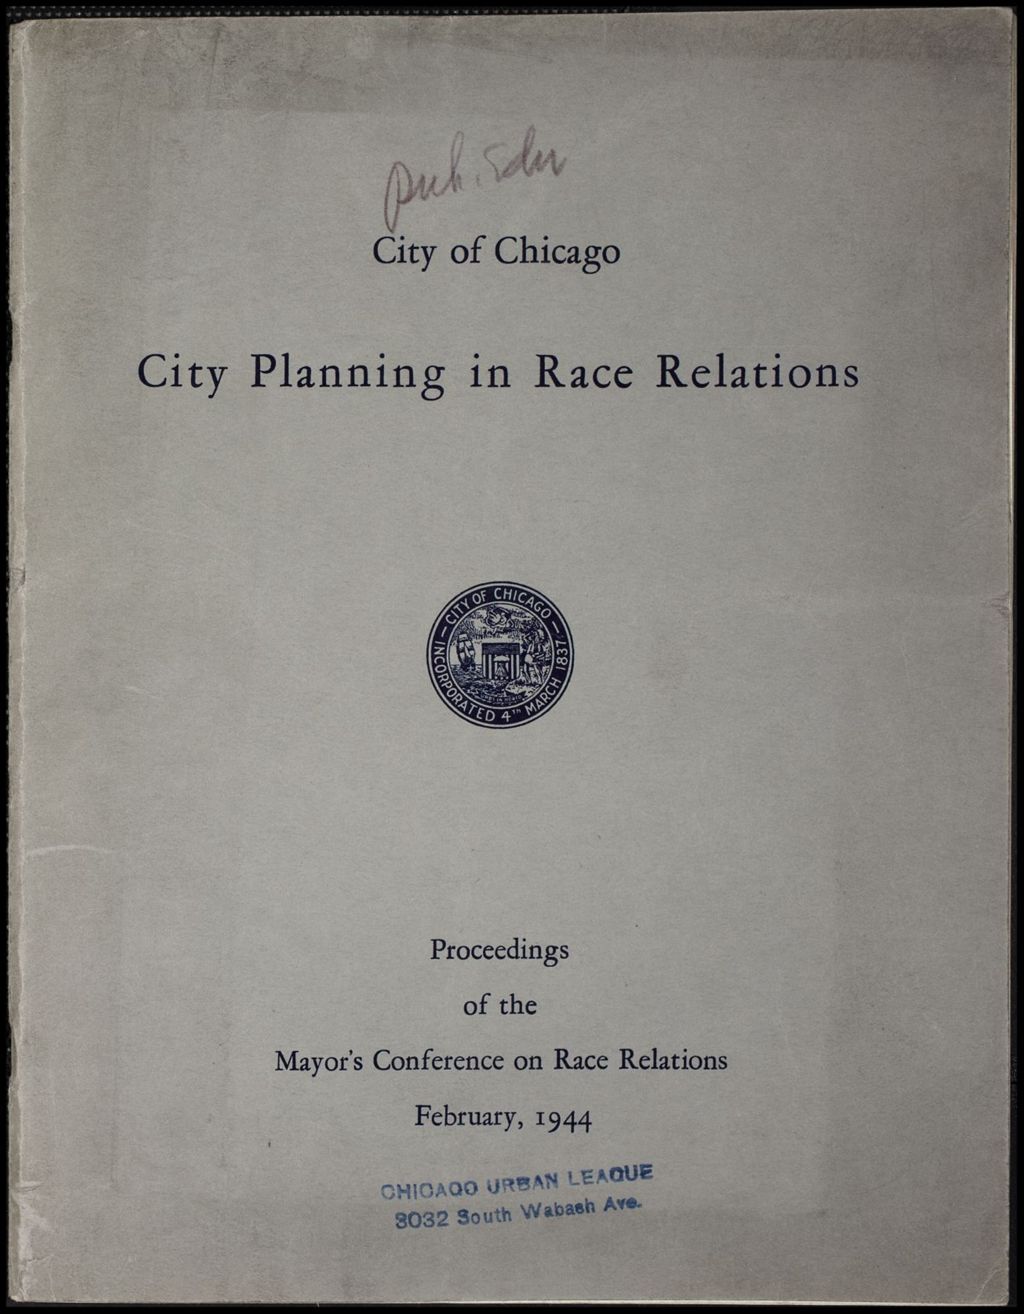 Miniature of Mayor's Conference on Race Relations minutes, 1944 (Folder I-2649)